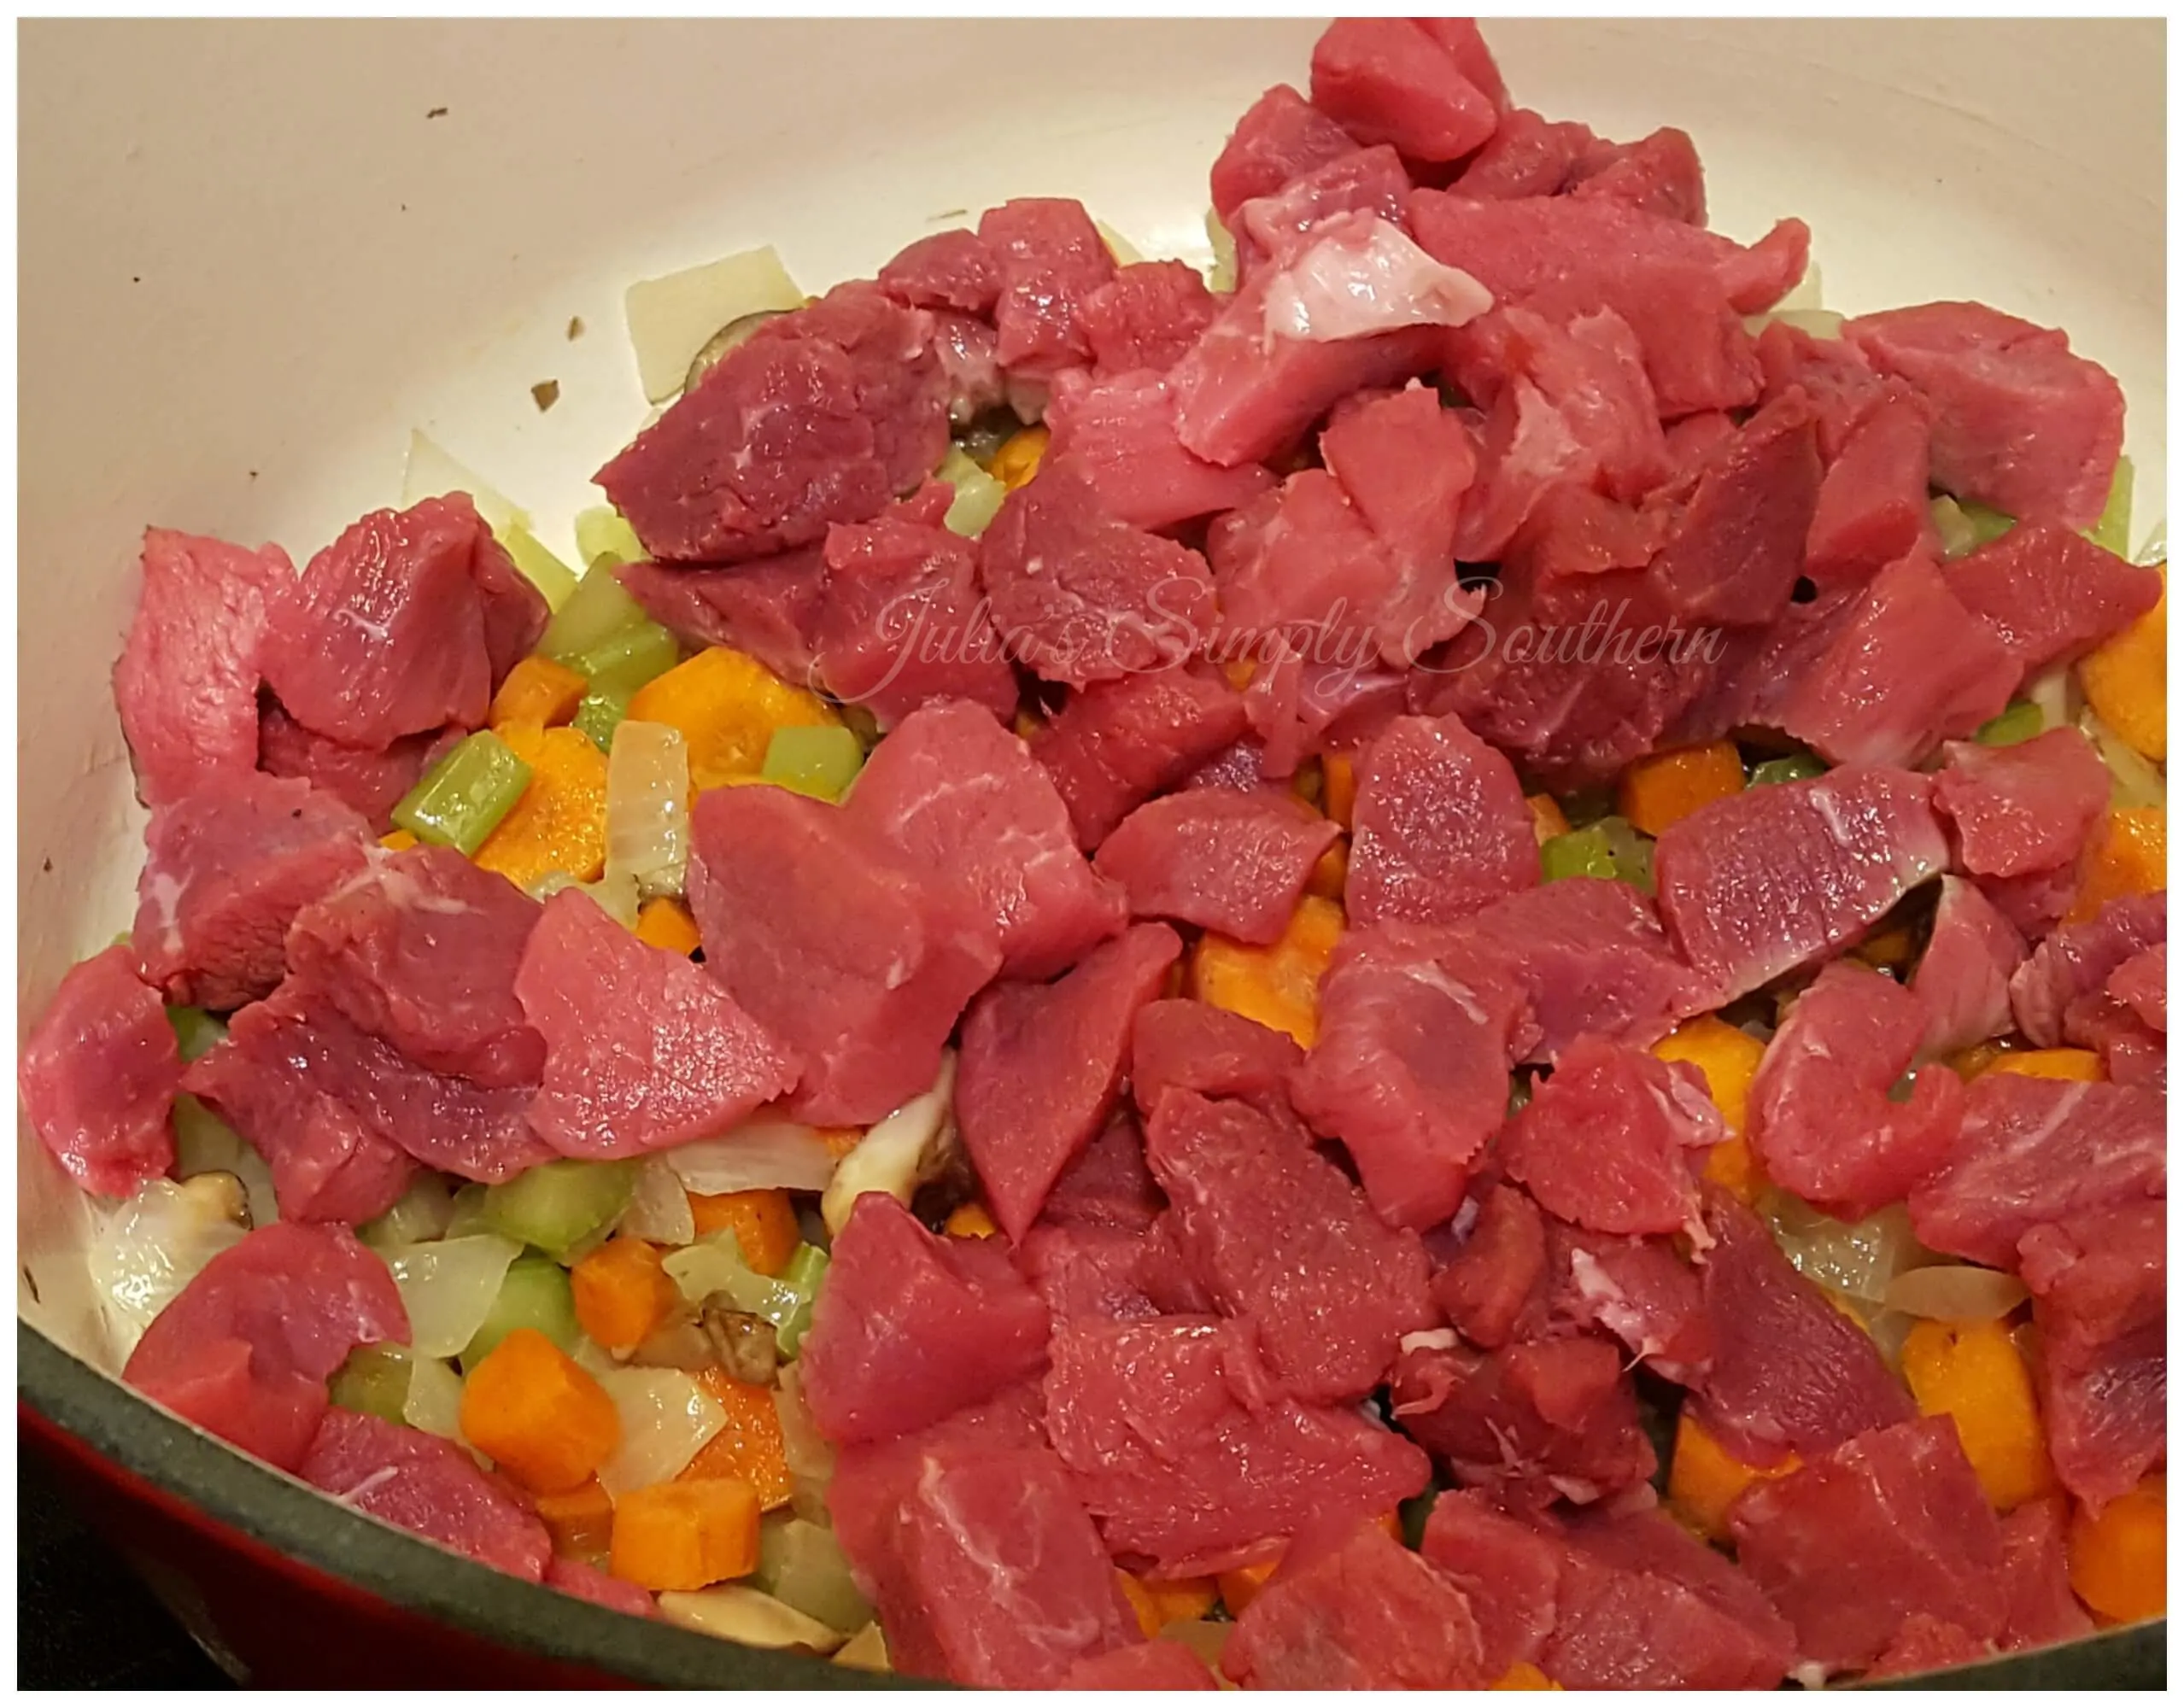 Making a pot of soup with beef